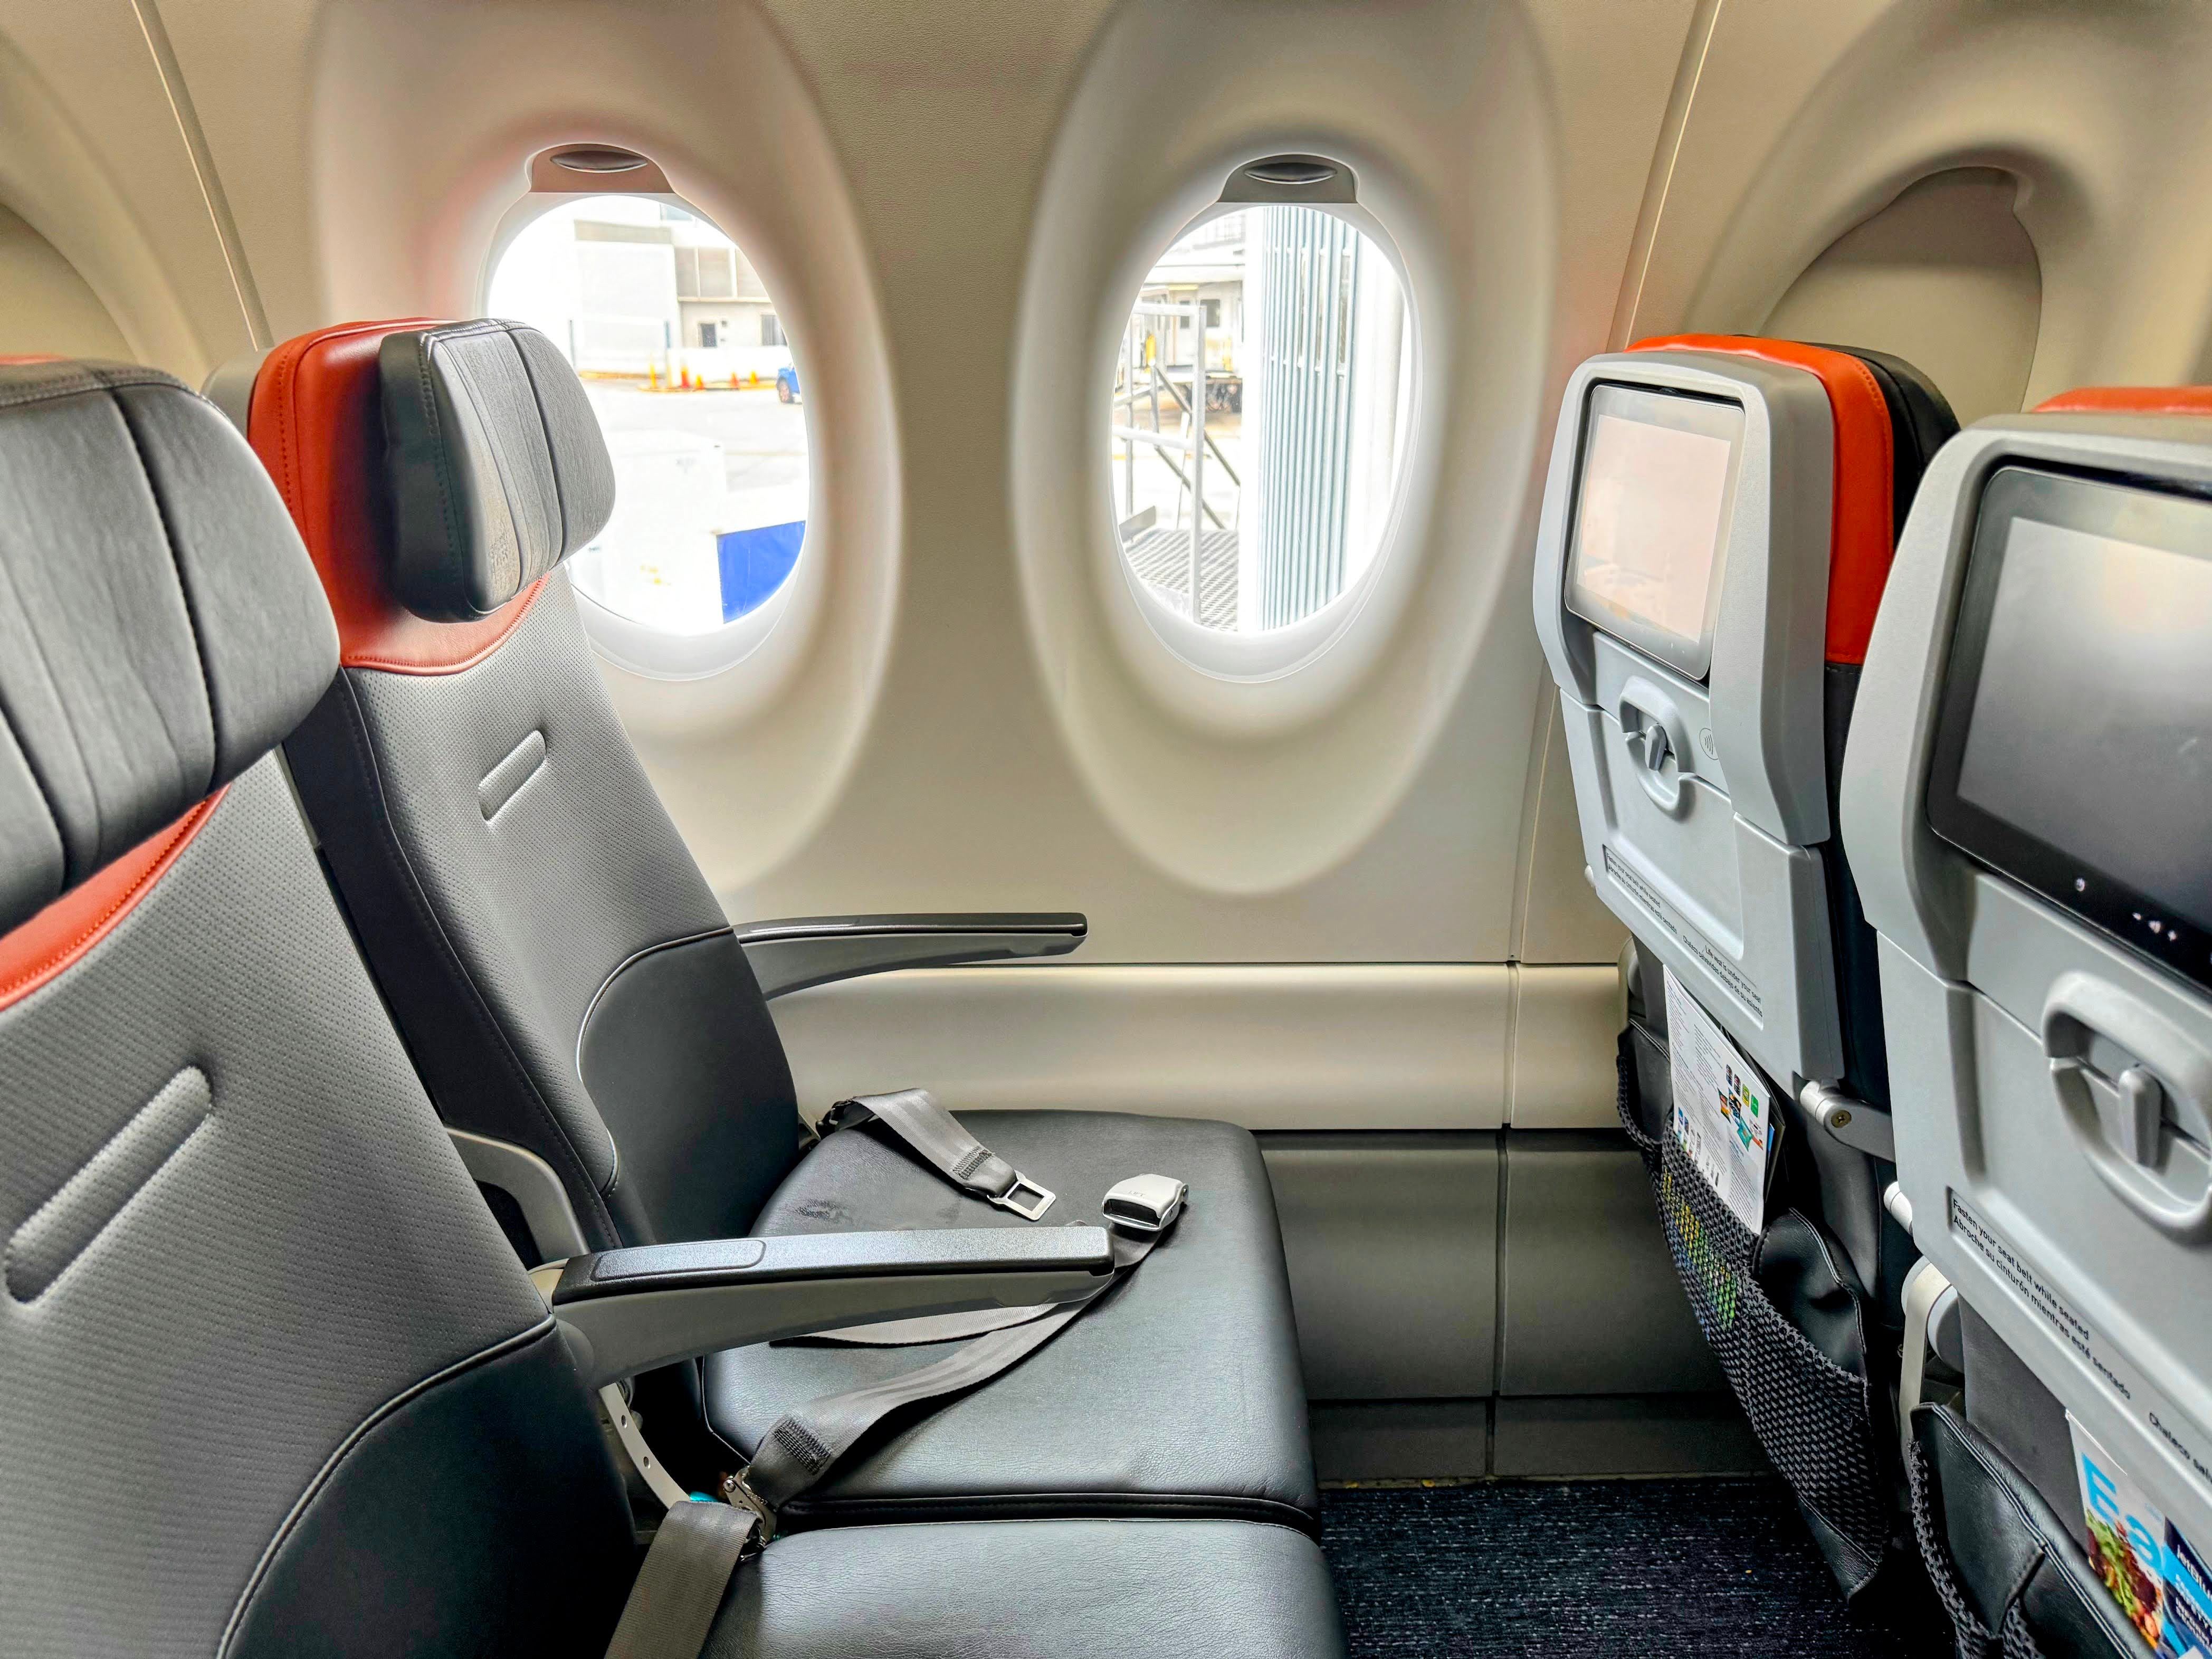 Even More Space seating on JetBlue's Airbus A220s